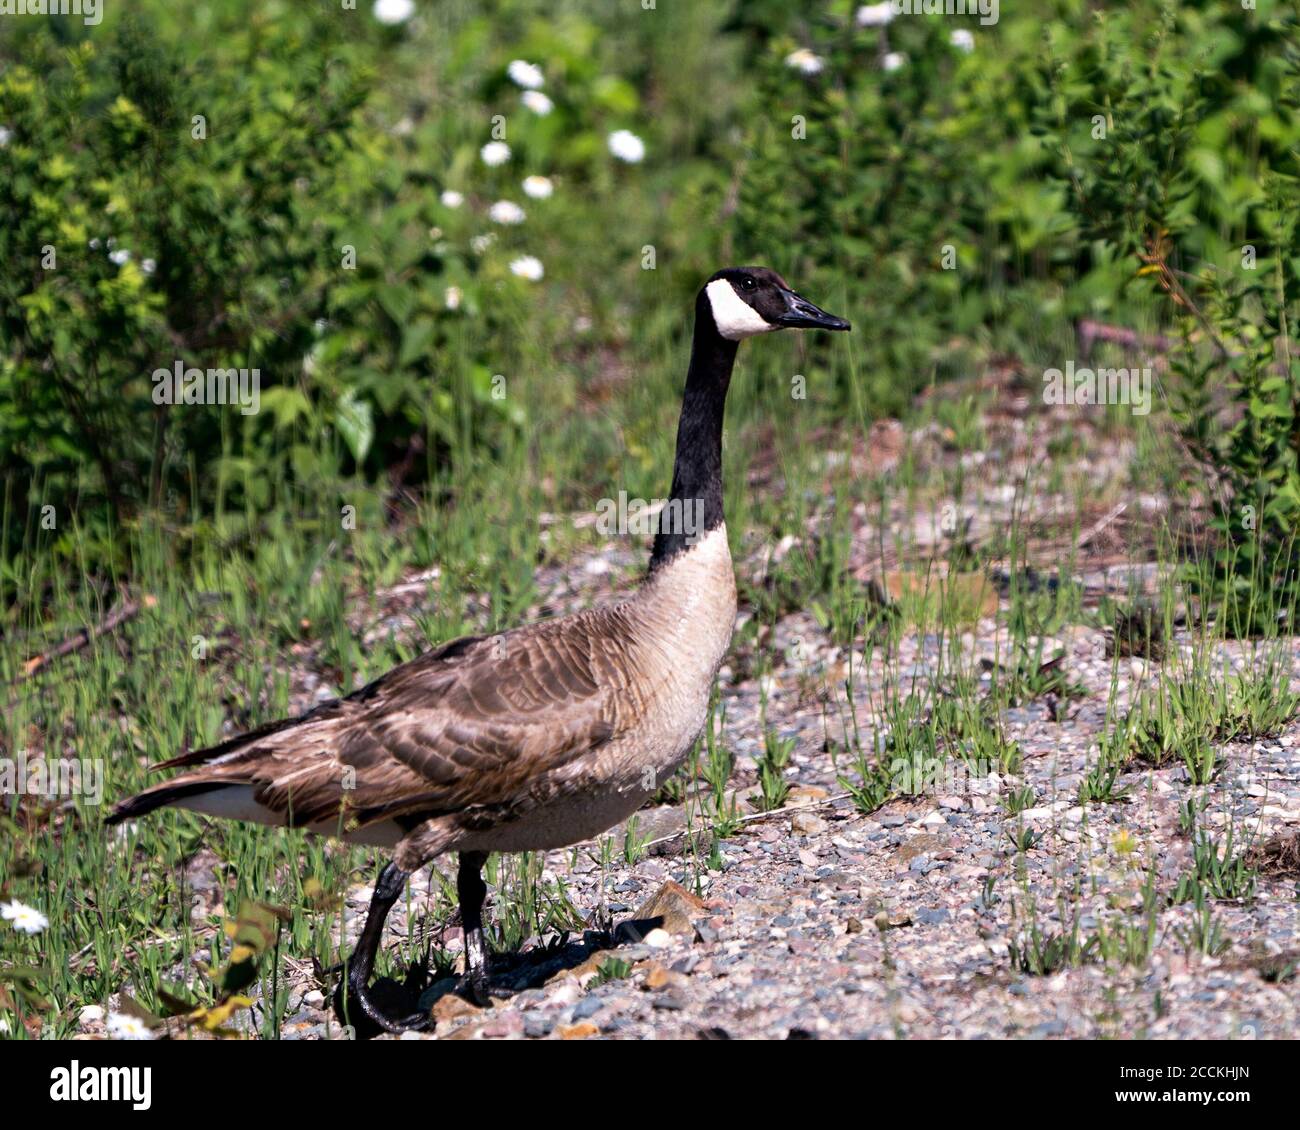 Canadian Geese close-up profile view displaying brown feather plumage, body  with a foliage background in its habitat and environment Stock Photo - Alamy